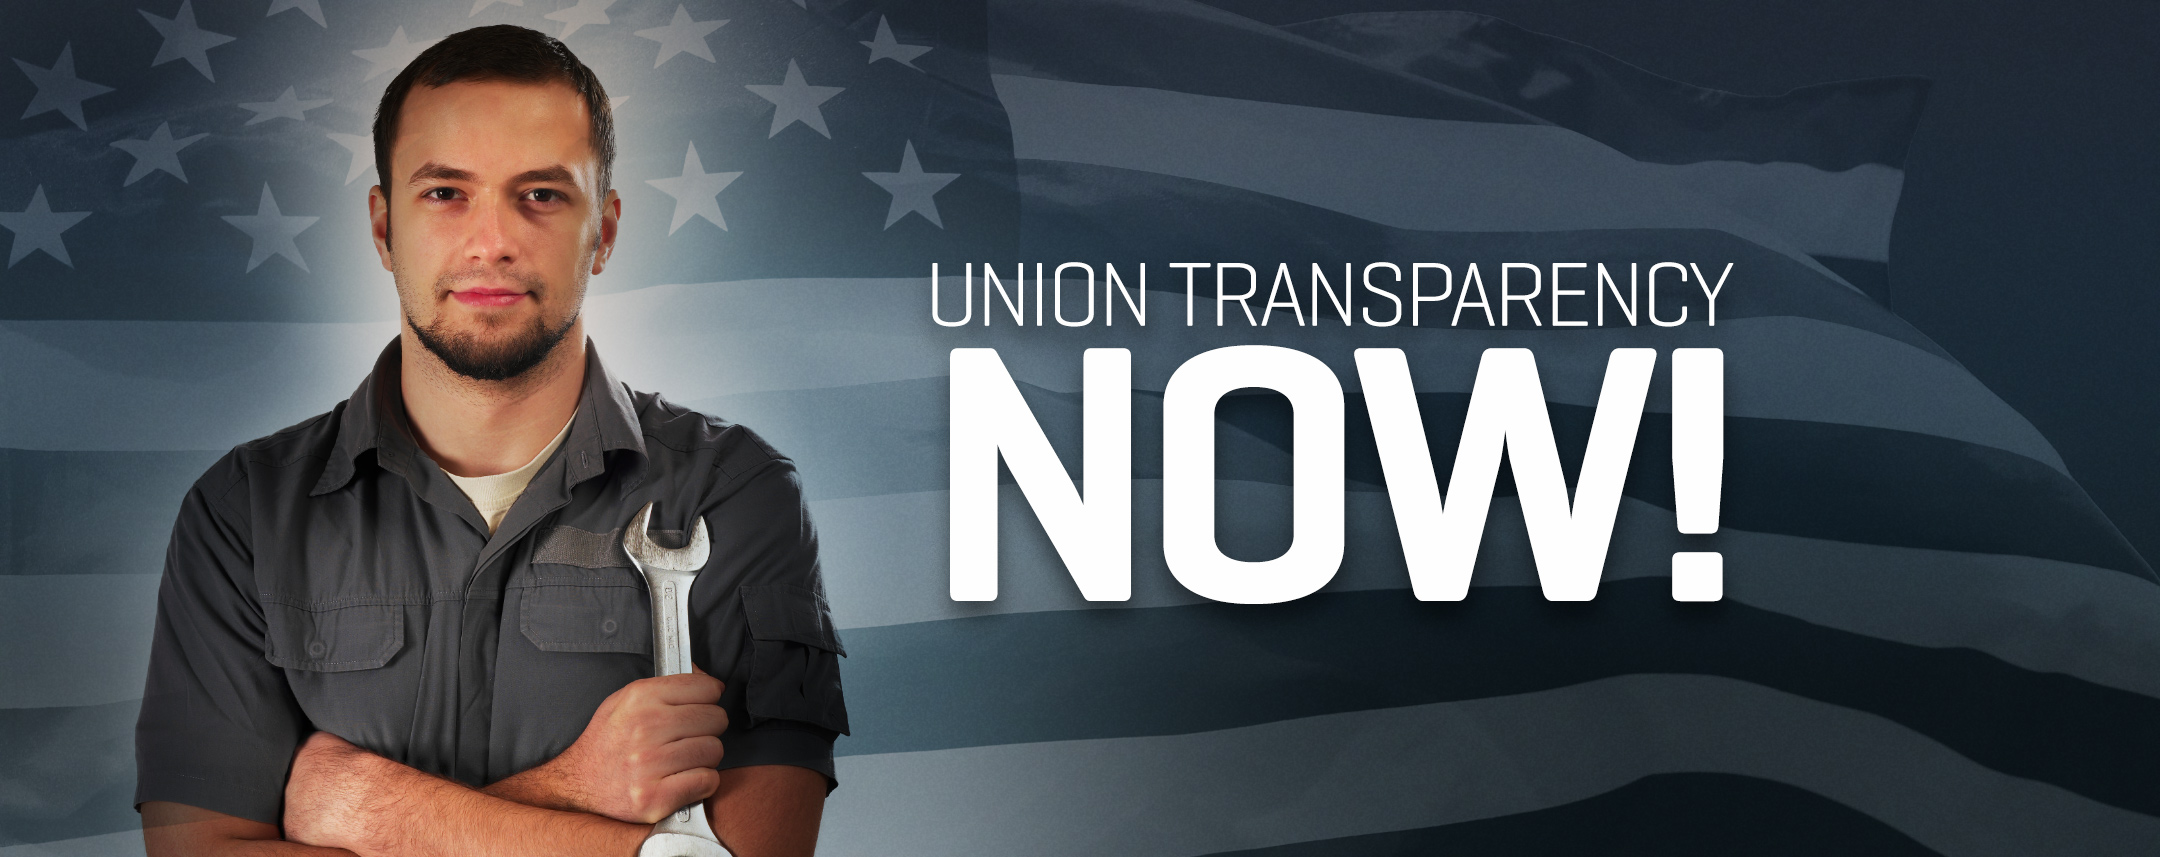 Union-Transparency-Now-FEATURED.jpg